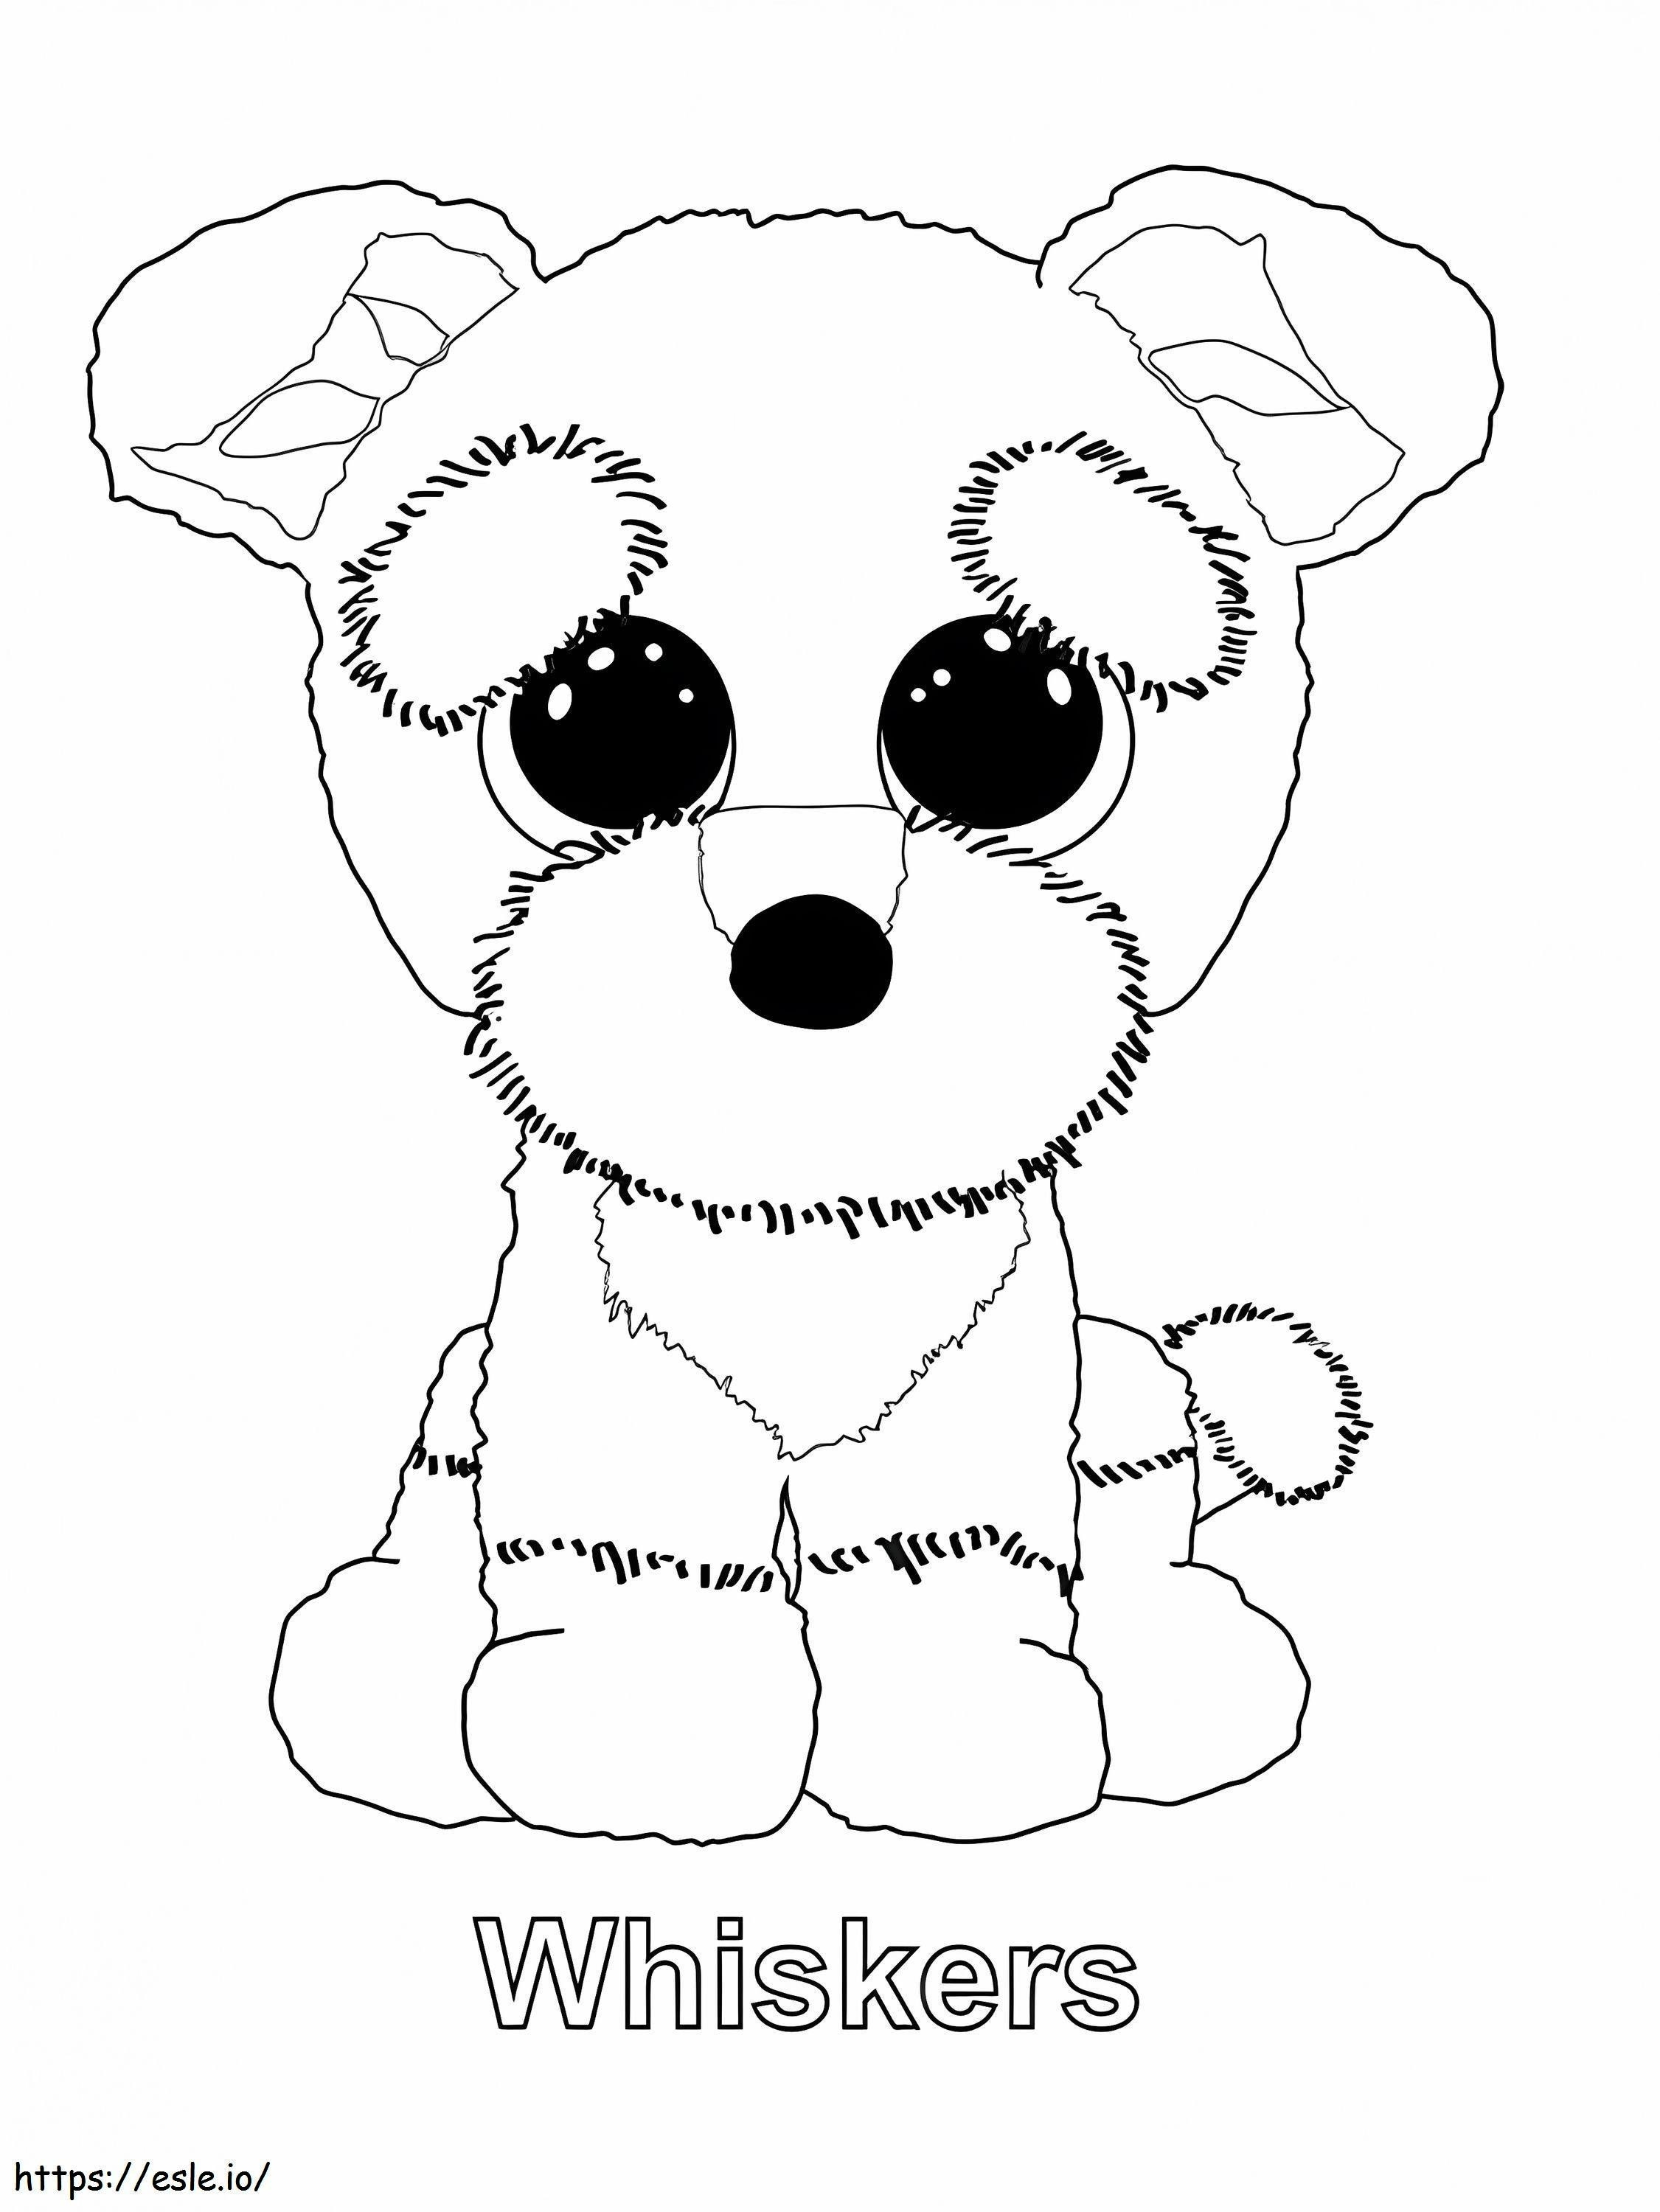 1584153661 Beanie Boo Lovely Cute Puppy Theog of Pictures Boos That People Draw Free ausmalbilder